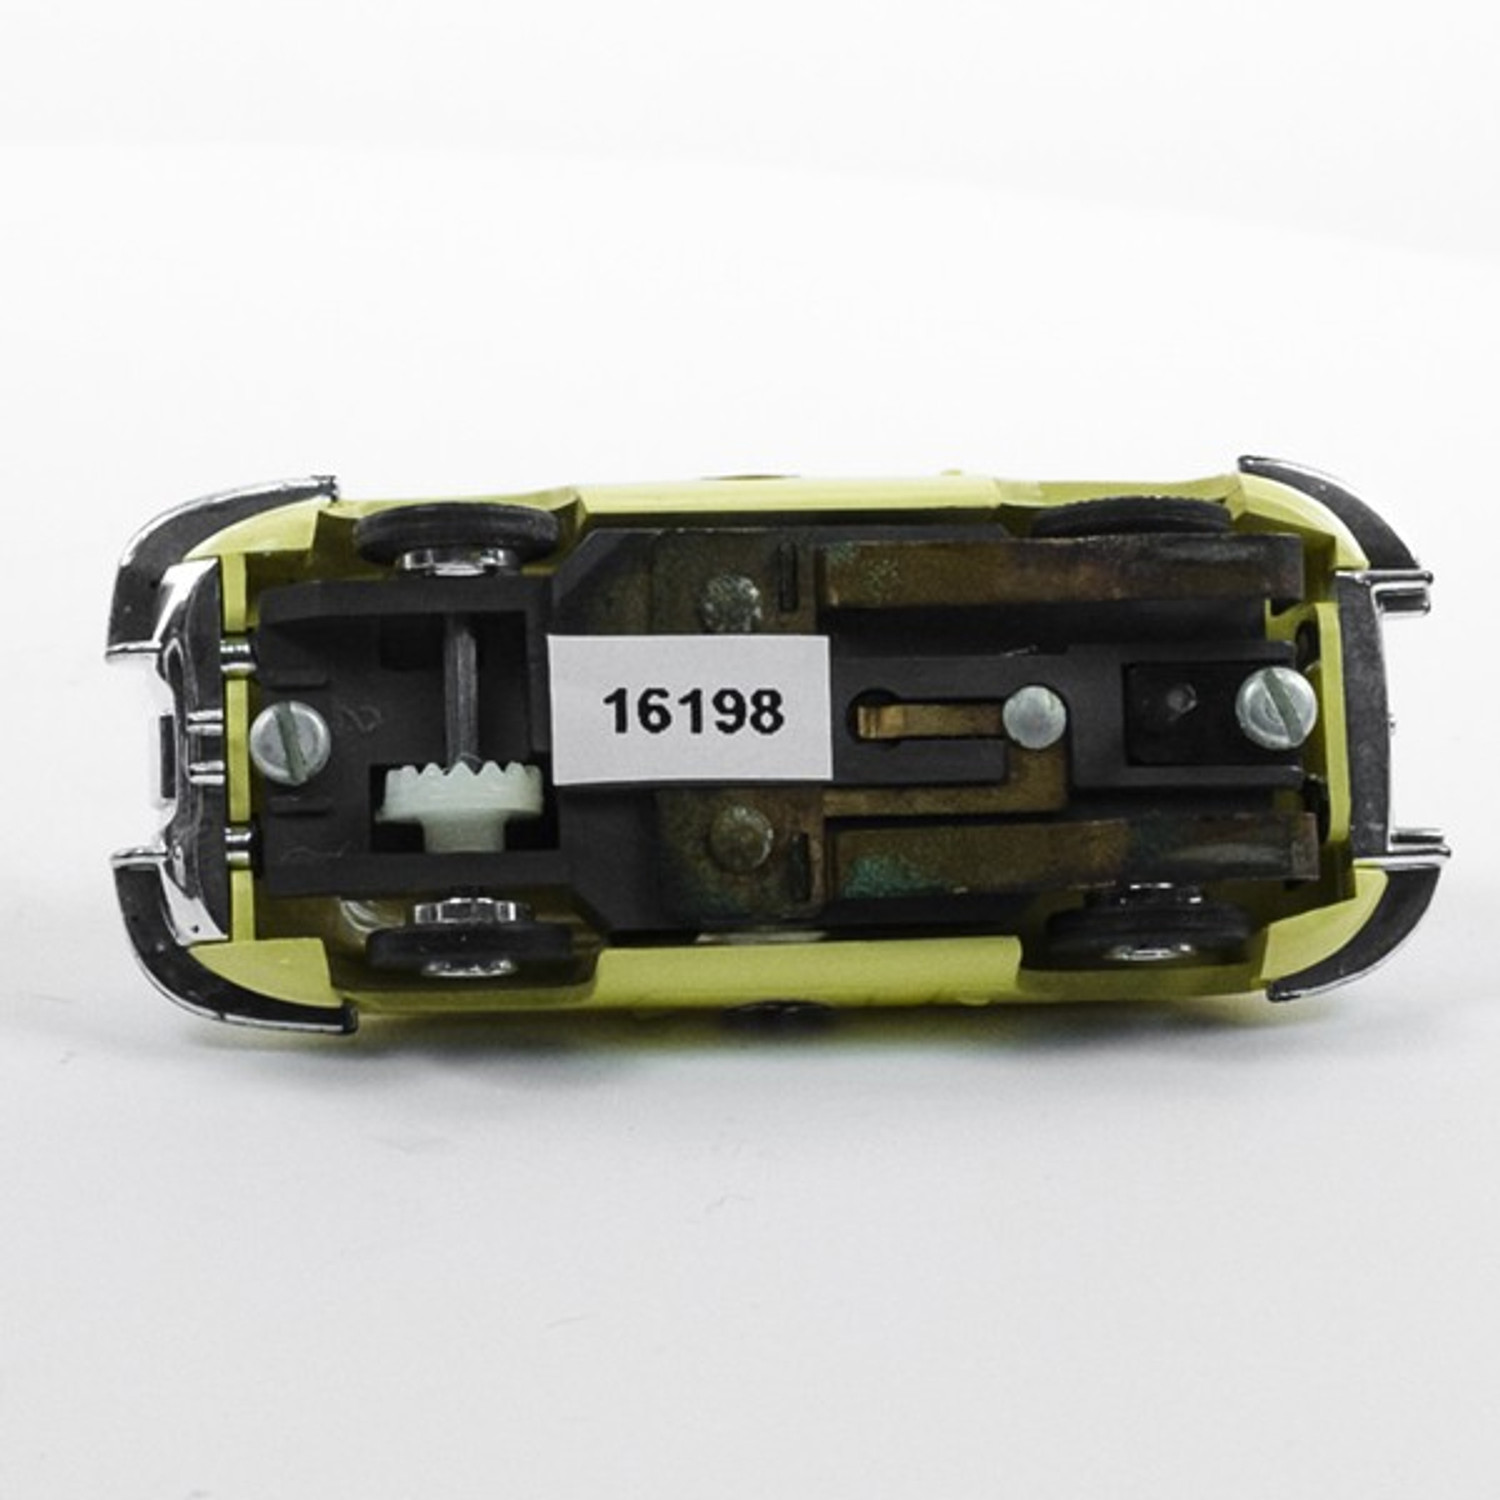 Stock Number: 16198 - Yellow Black Strip Number 33 by Unknown